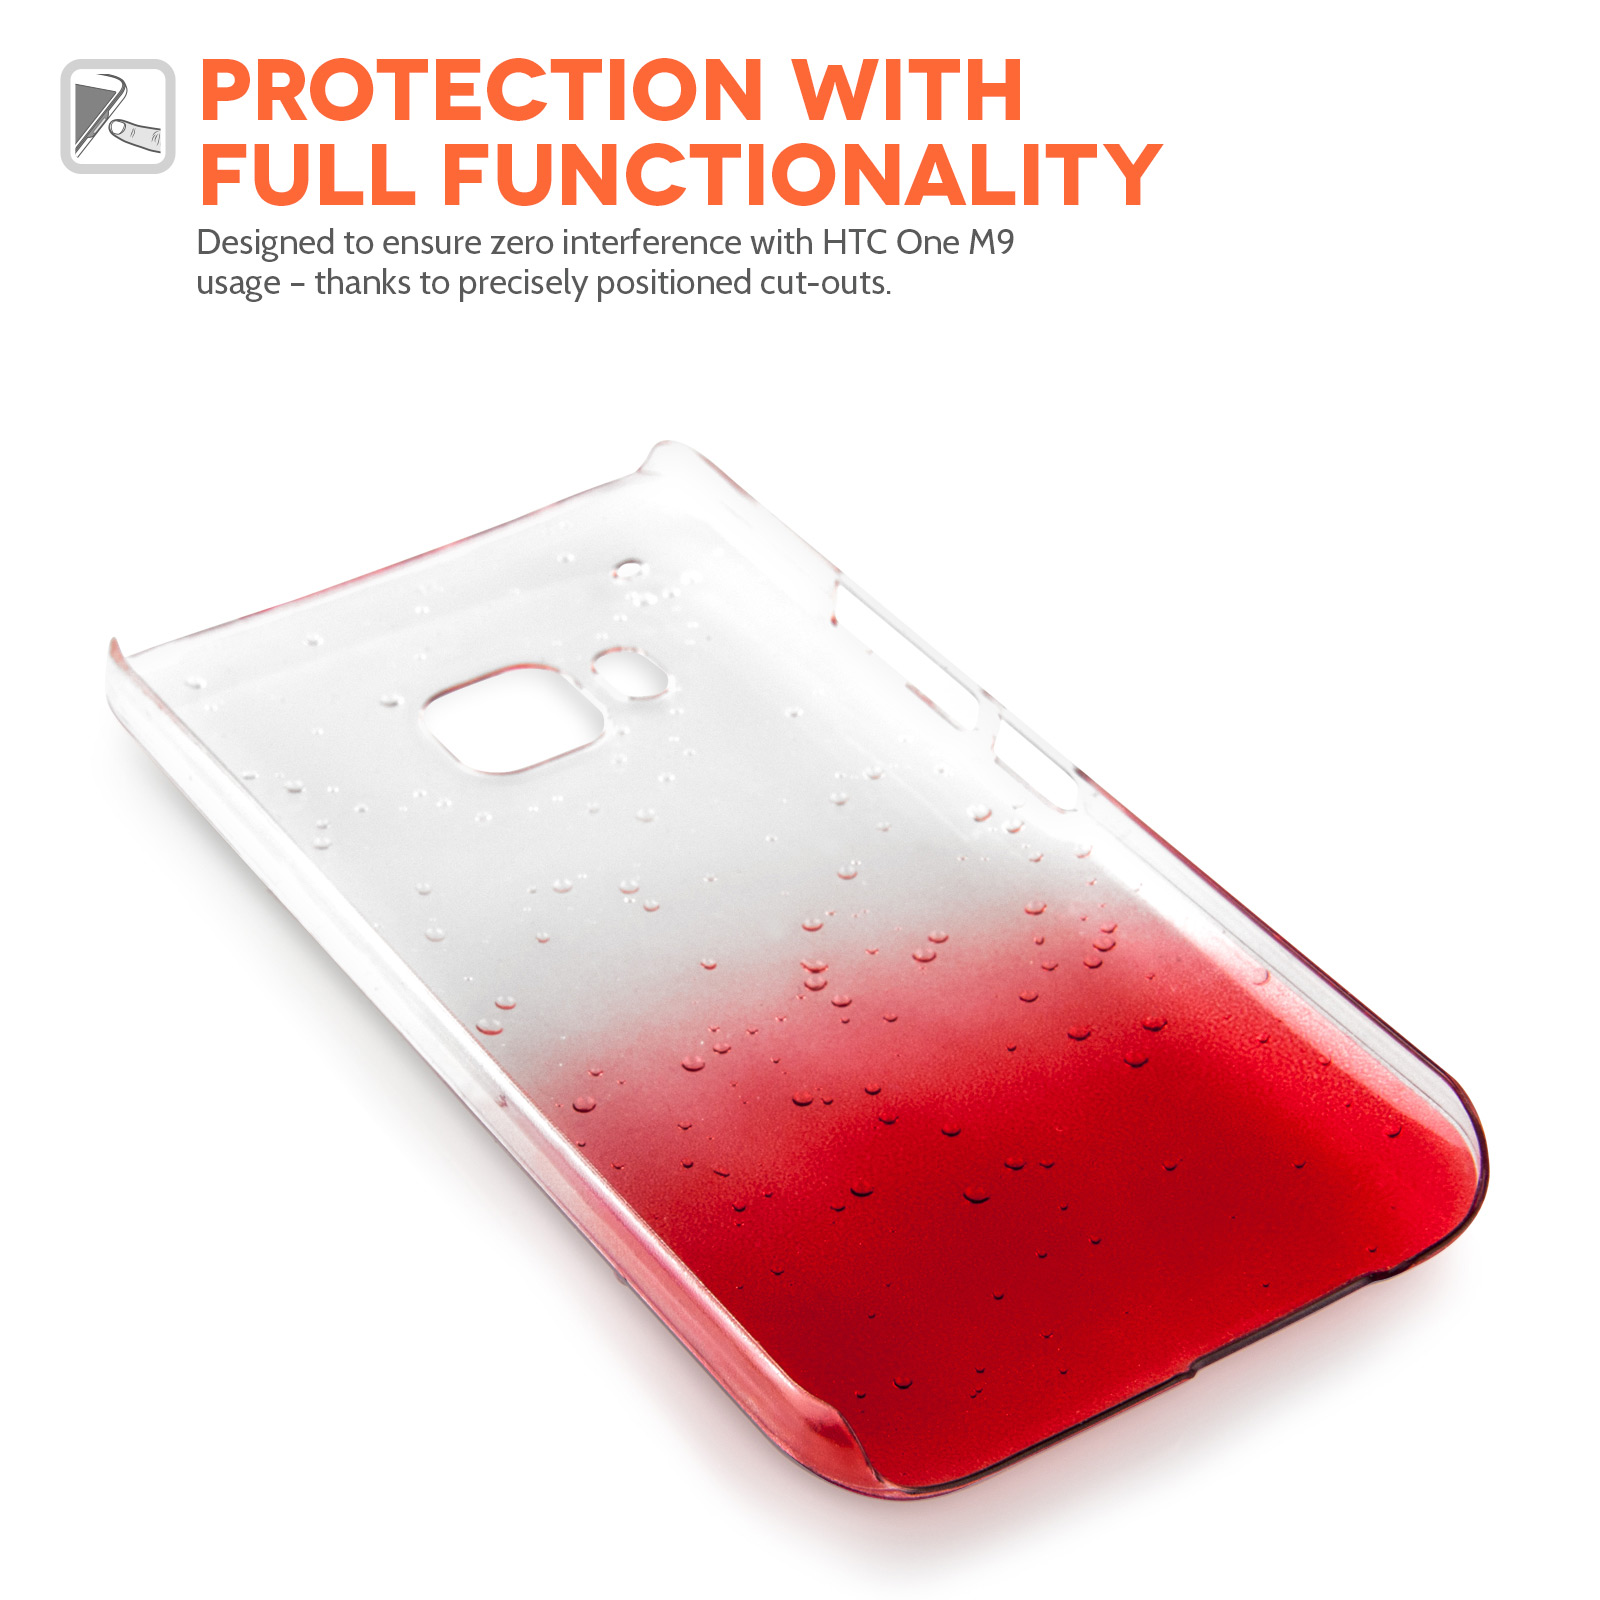 YouSave HTC M9 Raindrop Hard Case - Red-Clear